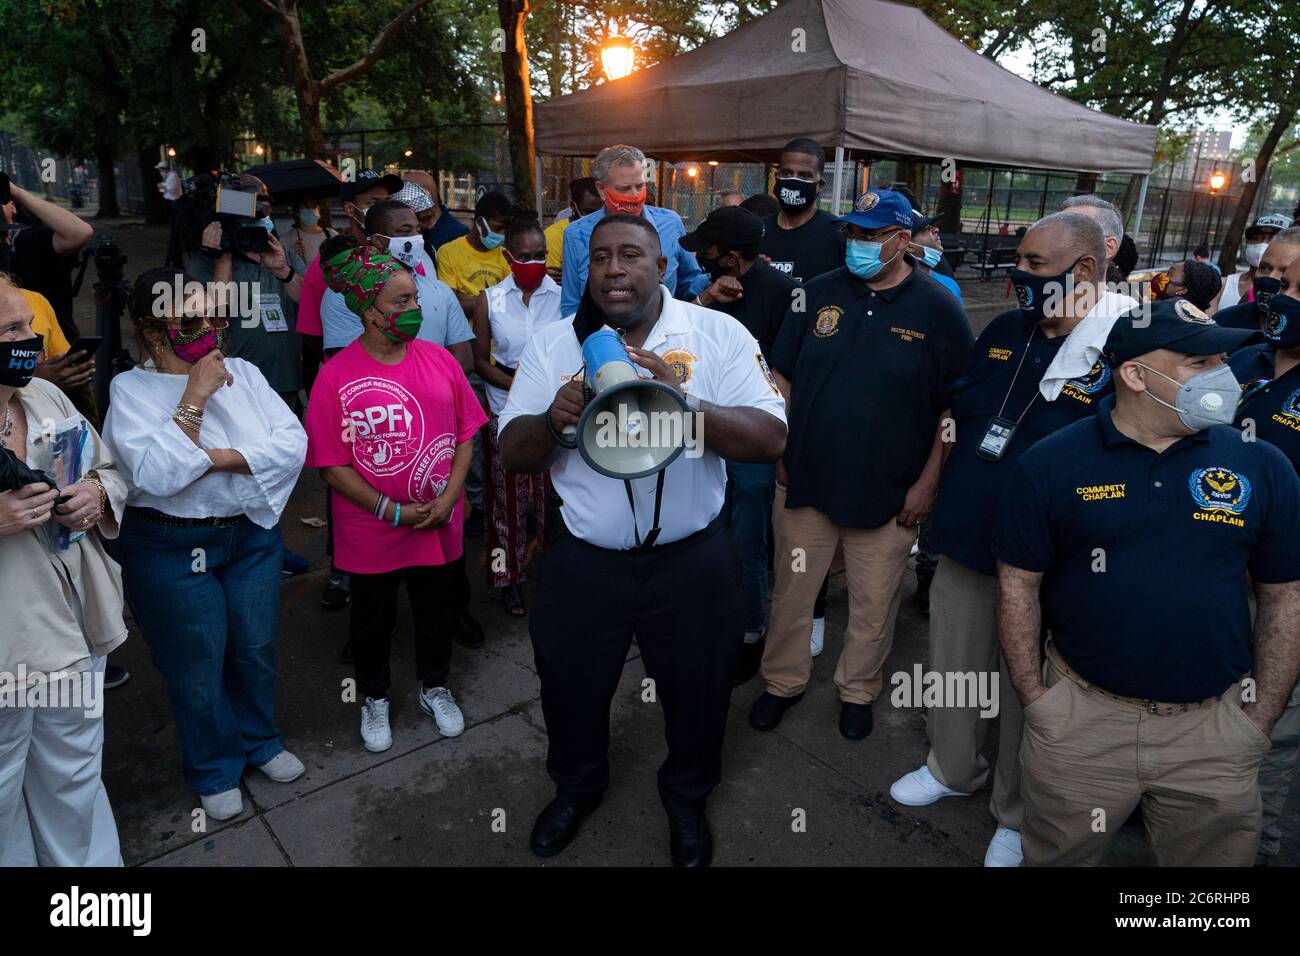 New York, NY - July 11, 2020: NYPD Chief Jeffrey Maddrey speaks at Occupy the Corner rally in East Harlem in response on gun violence Stock Photo